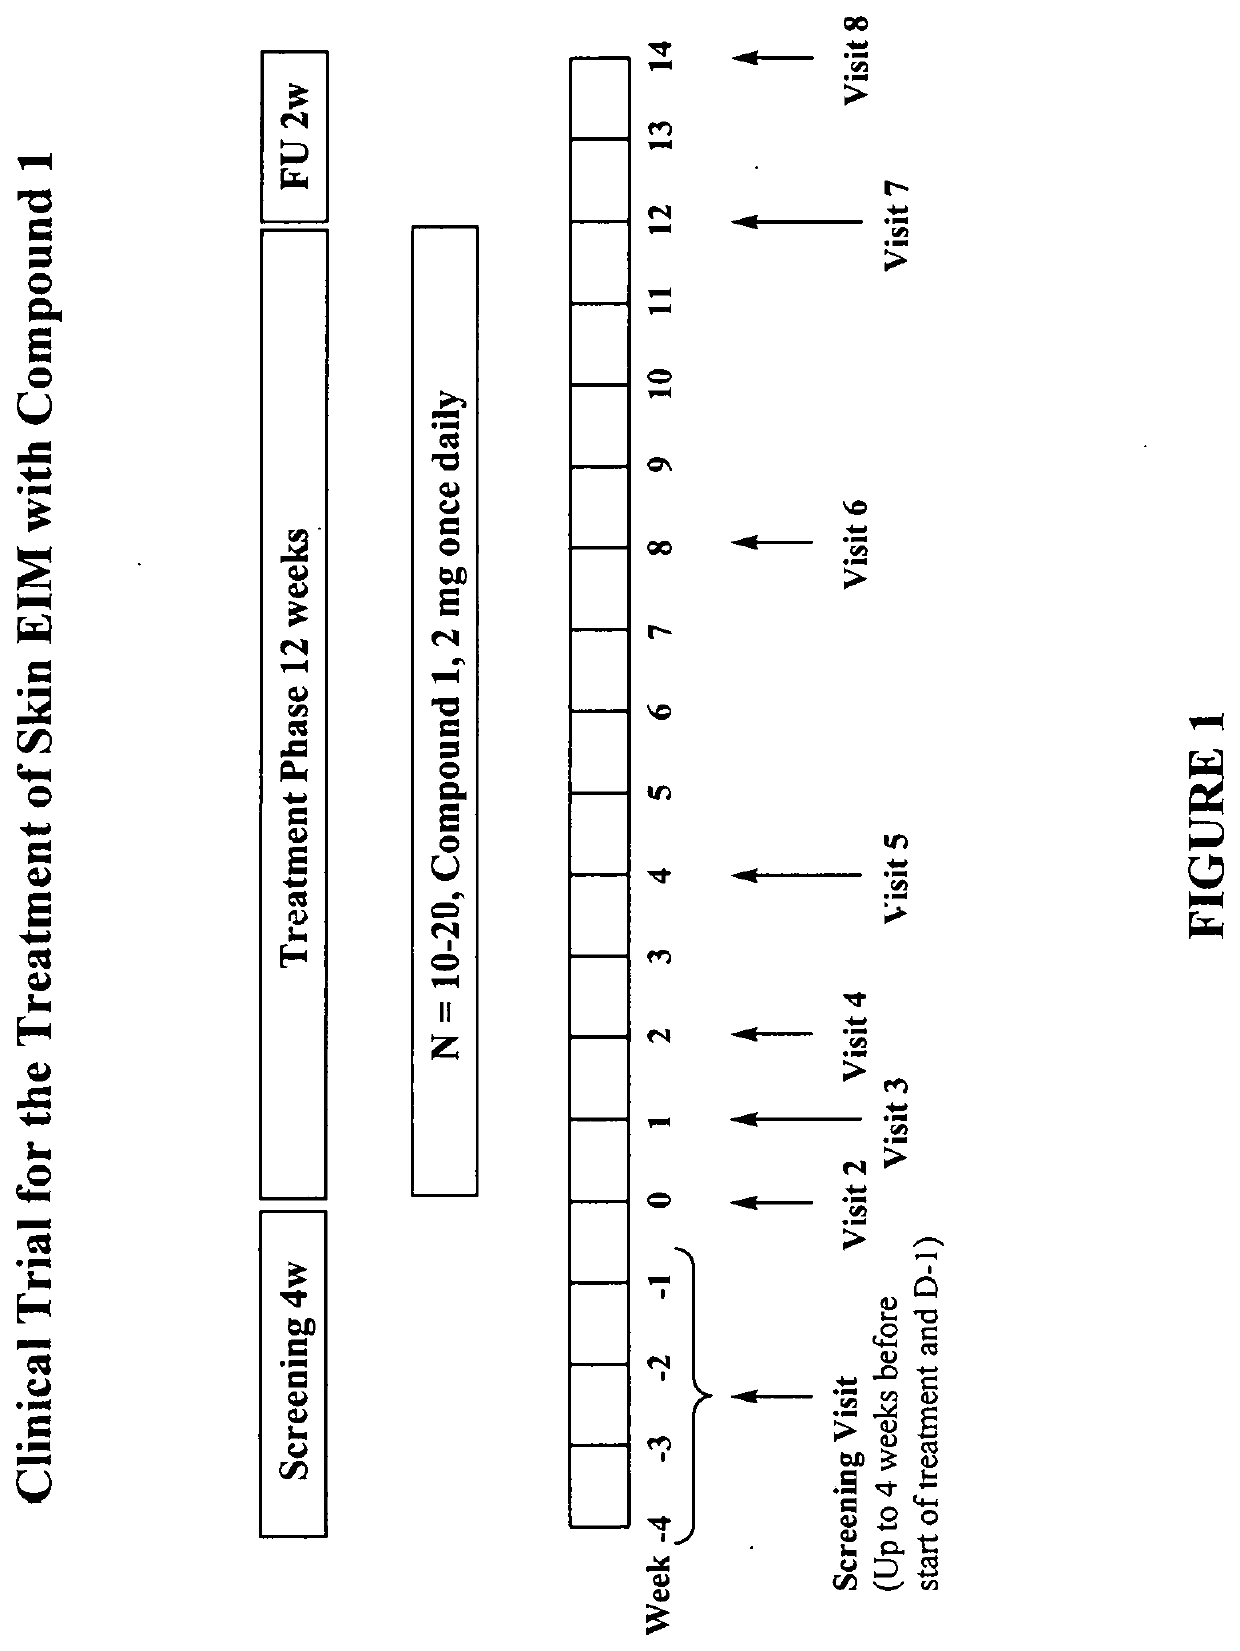 Compounds and methods for treatment of inflammatory bowel disease with extra-intestinal manifestations